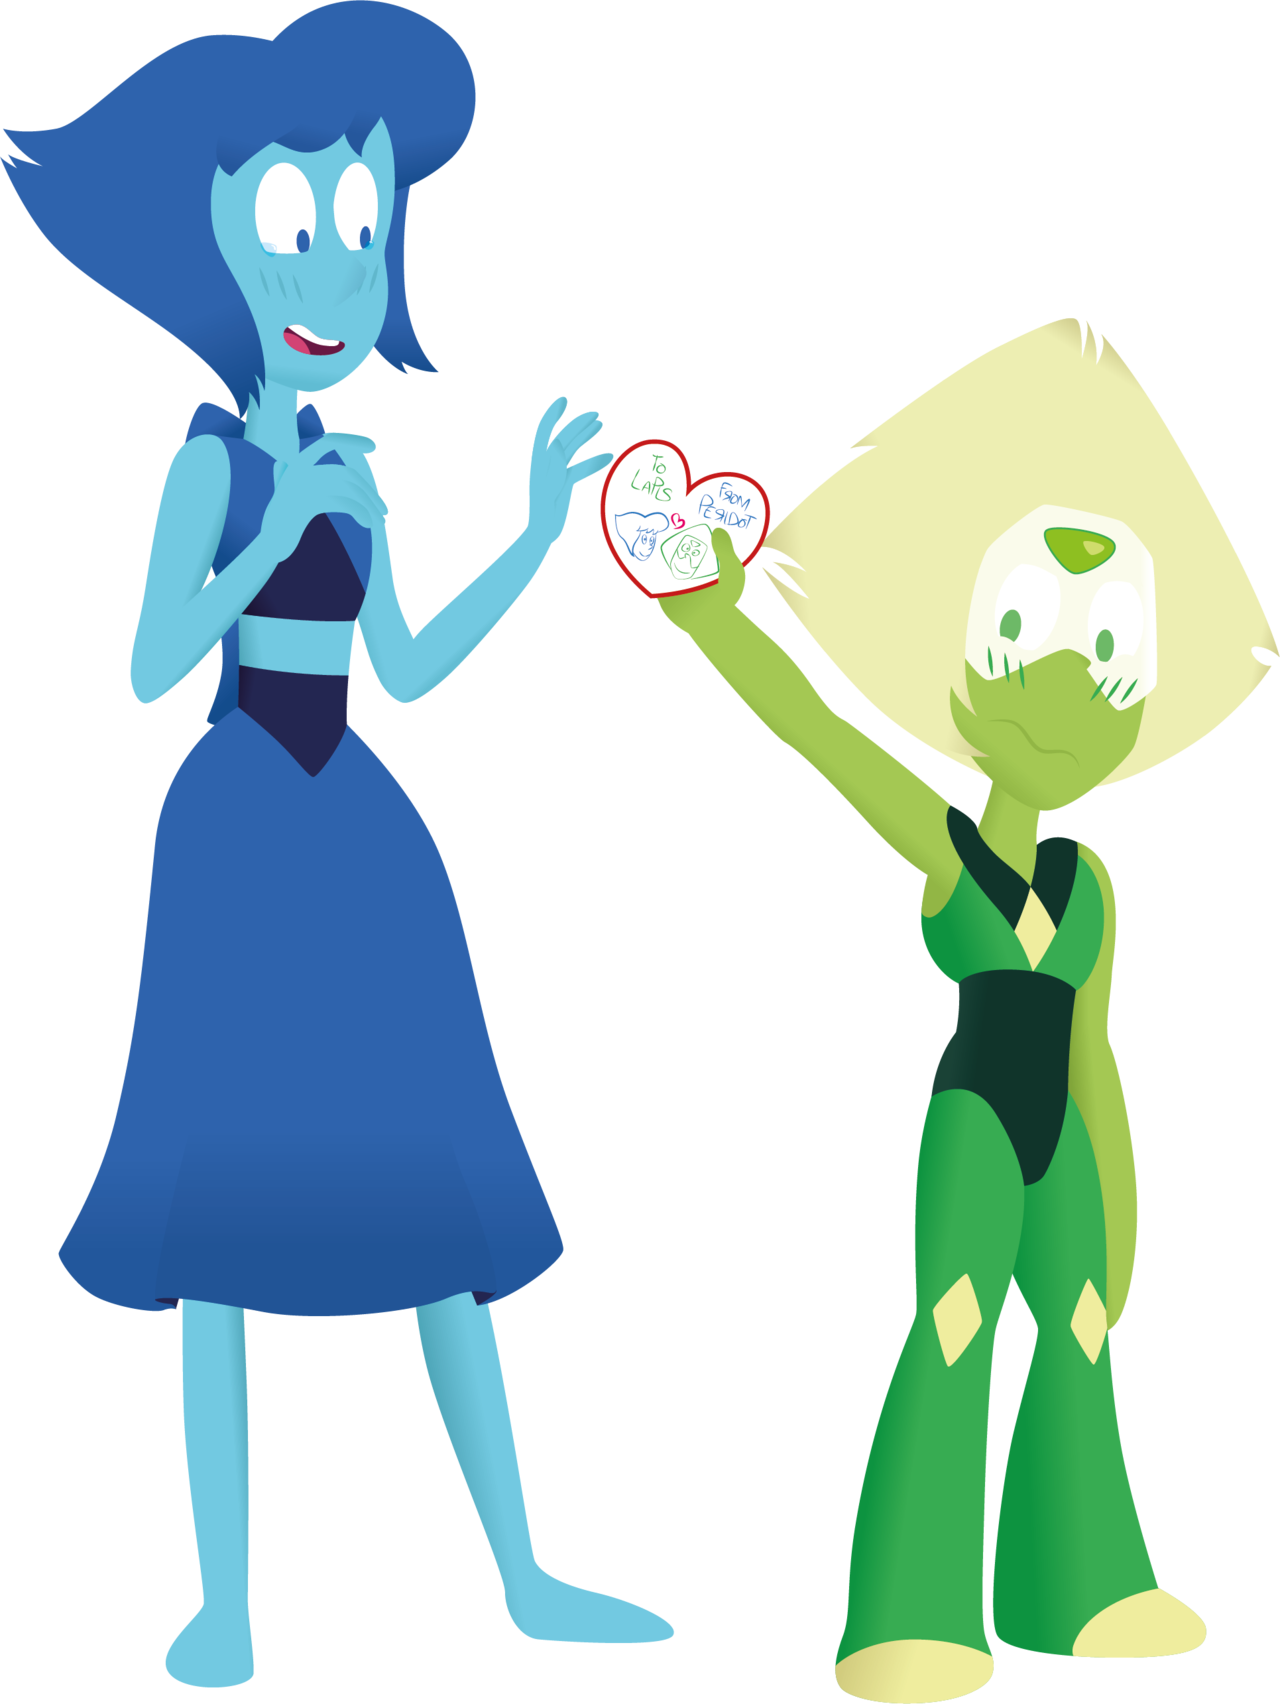 HAPPY VALENTINE! Happy Valentine from Ruby, Sapphire, Pearl, Amethyst, Lapis and Peridot P.s. One of this draw is for my Valentine, so… happy Valentine’s day my clod